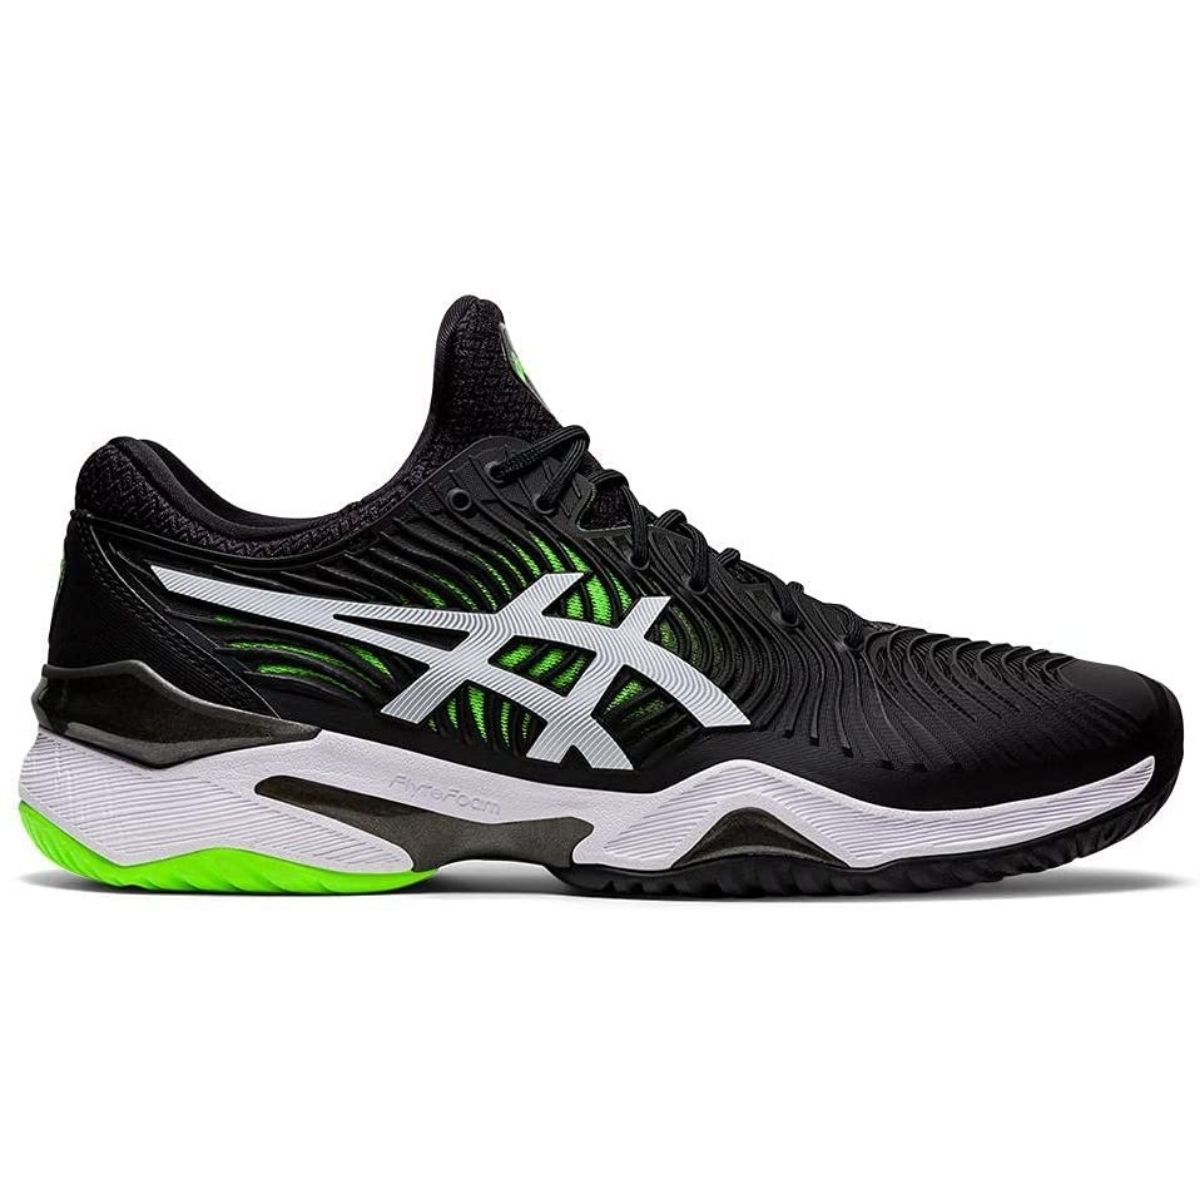 The Best Tennis Shoes Options: Asics Court FF 2